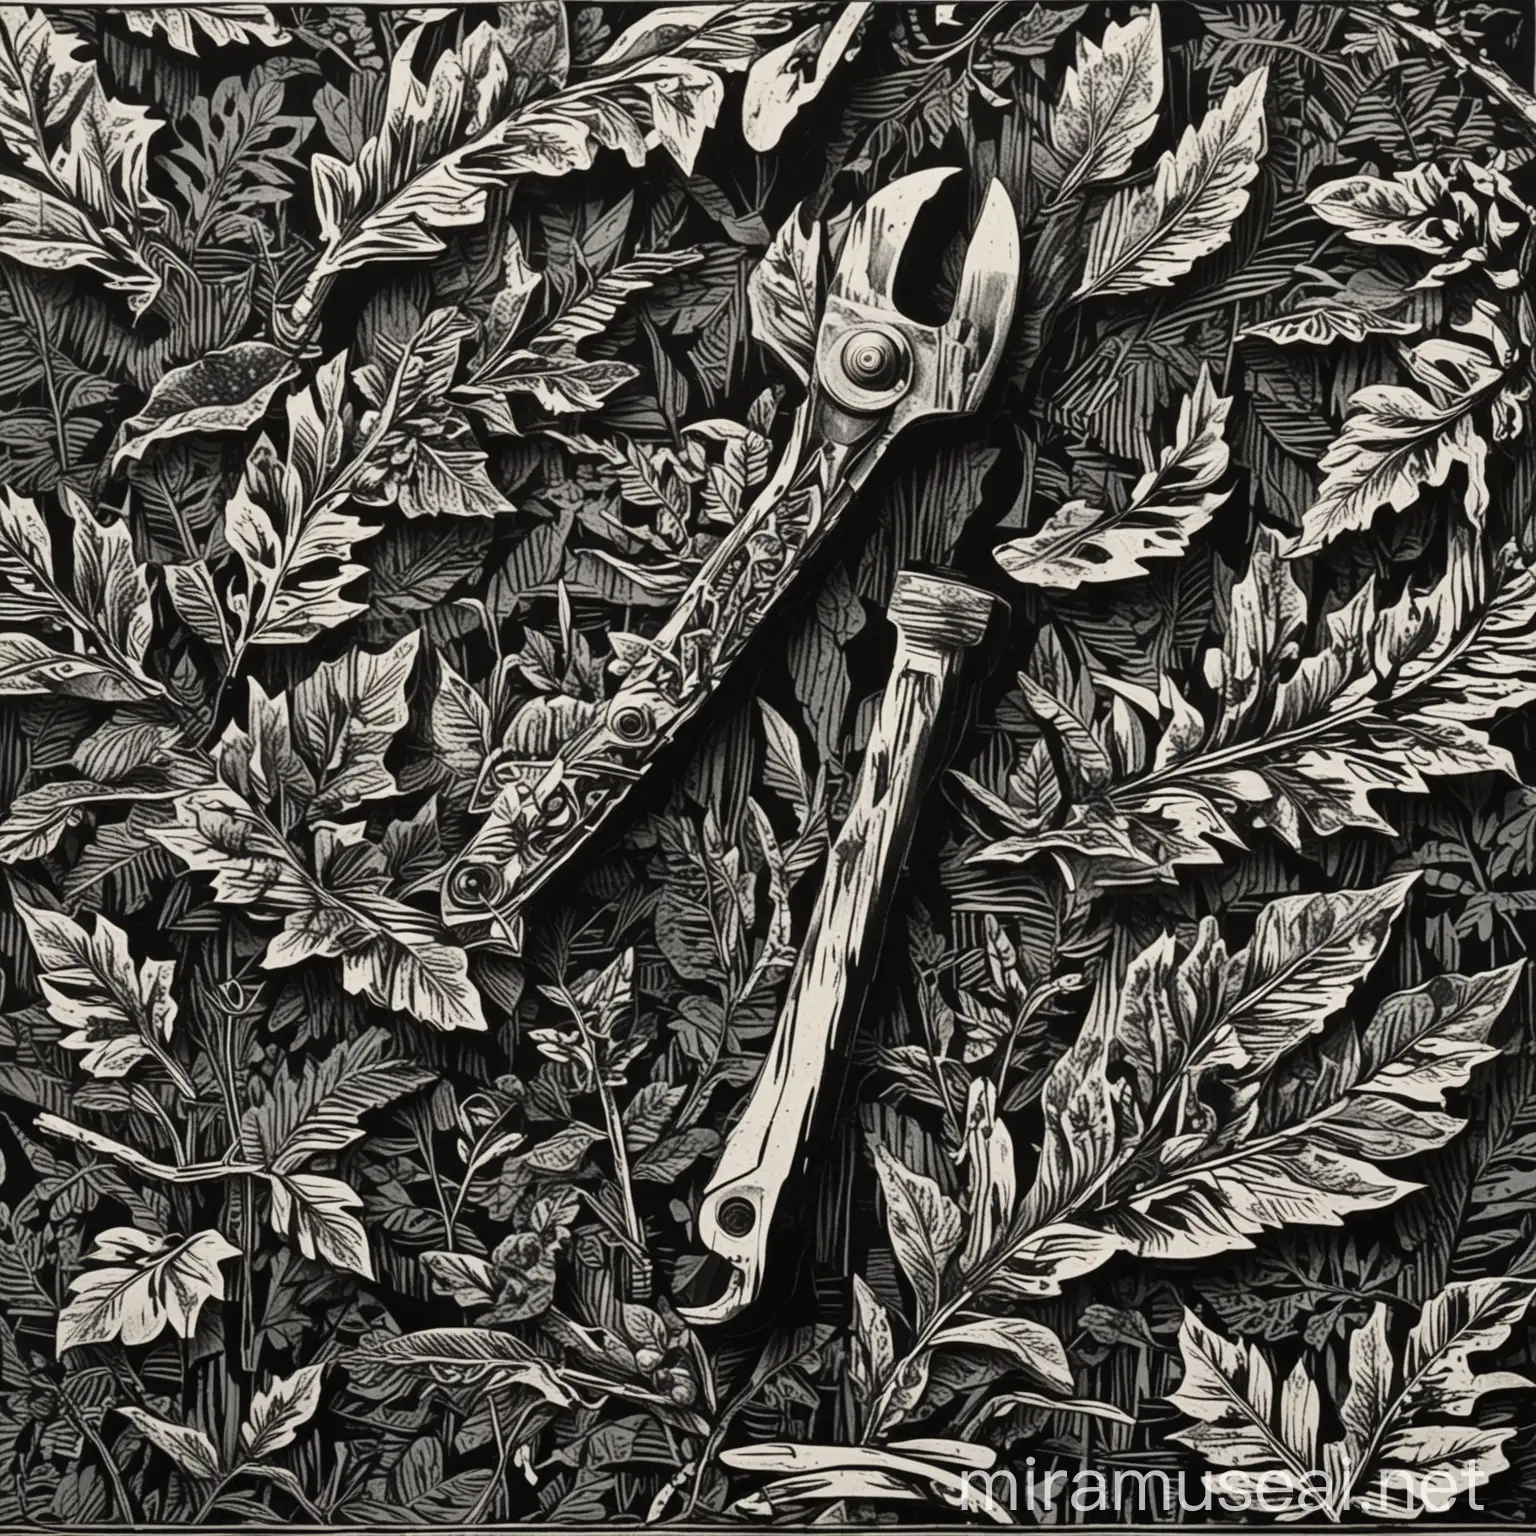 Organic Forest Floor Linoleum Block Print with Wrench Covered in Leaves